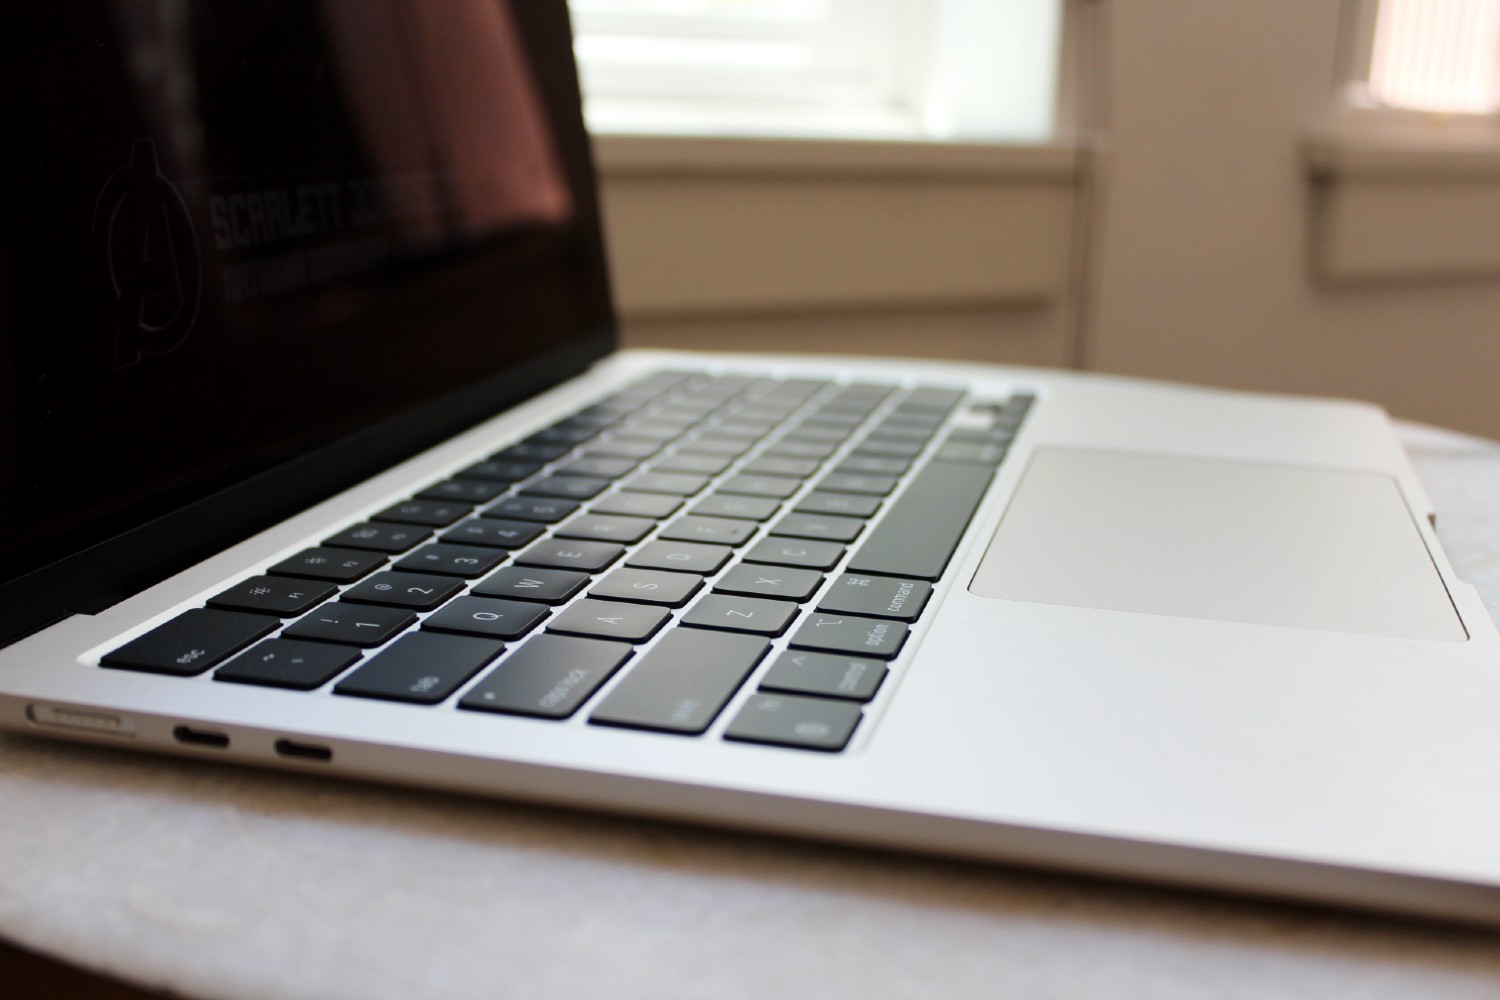 New MacBook Air has more to love